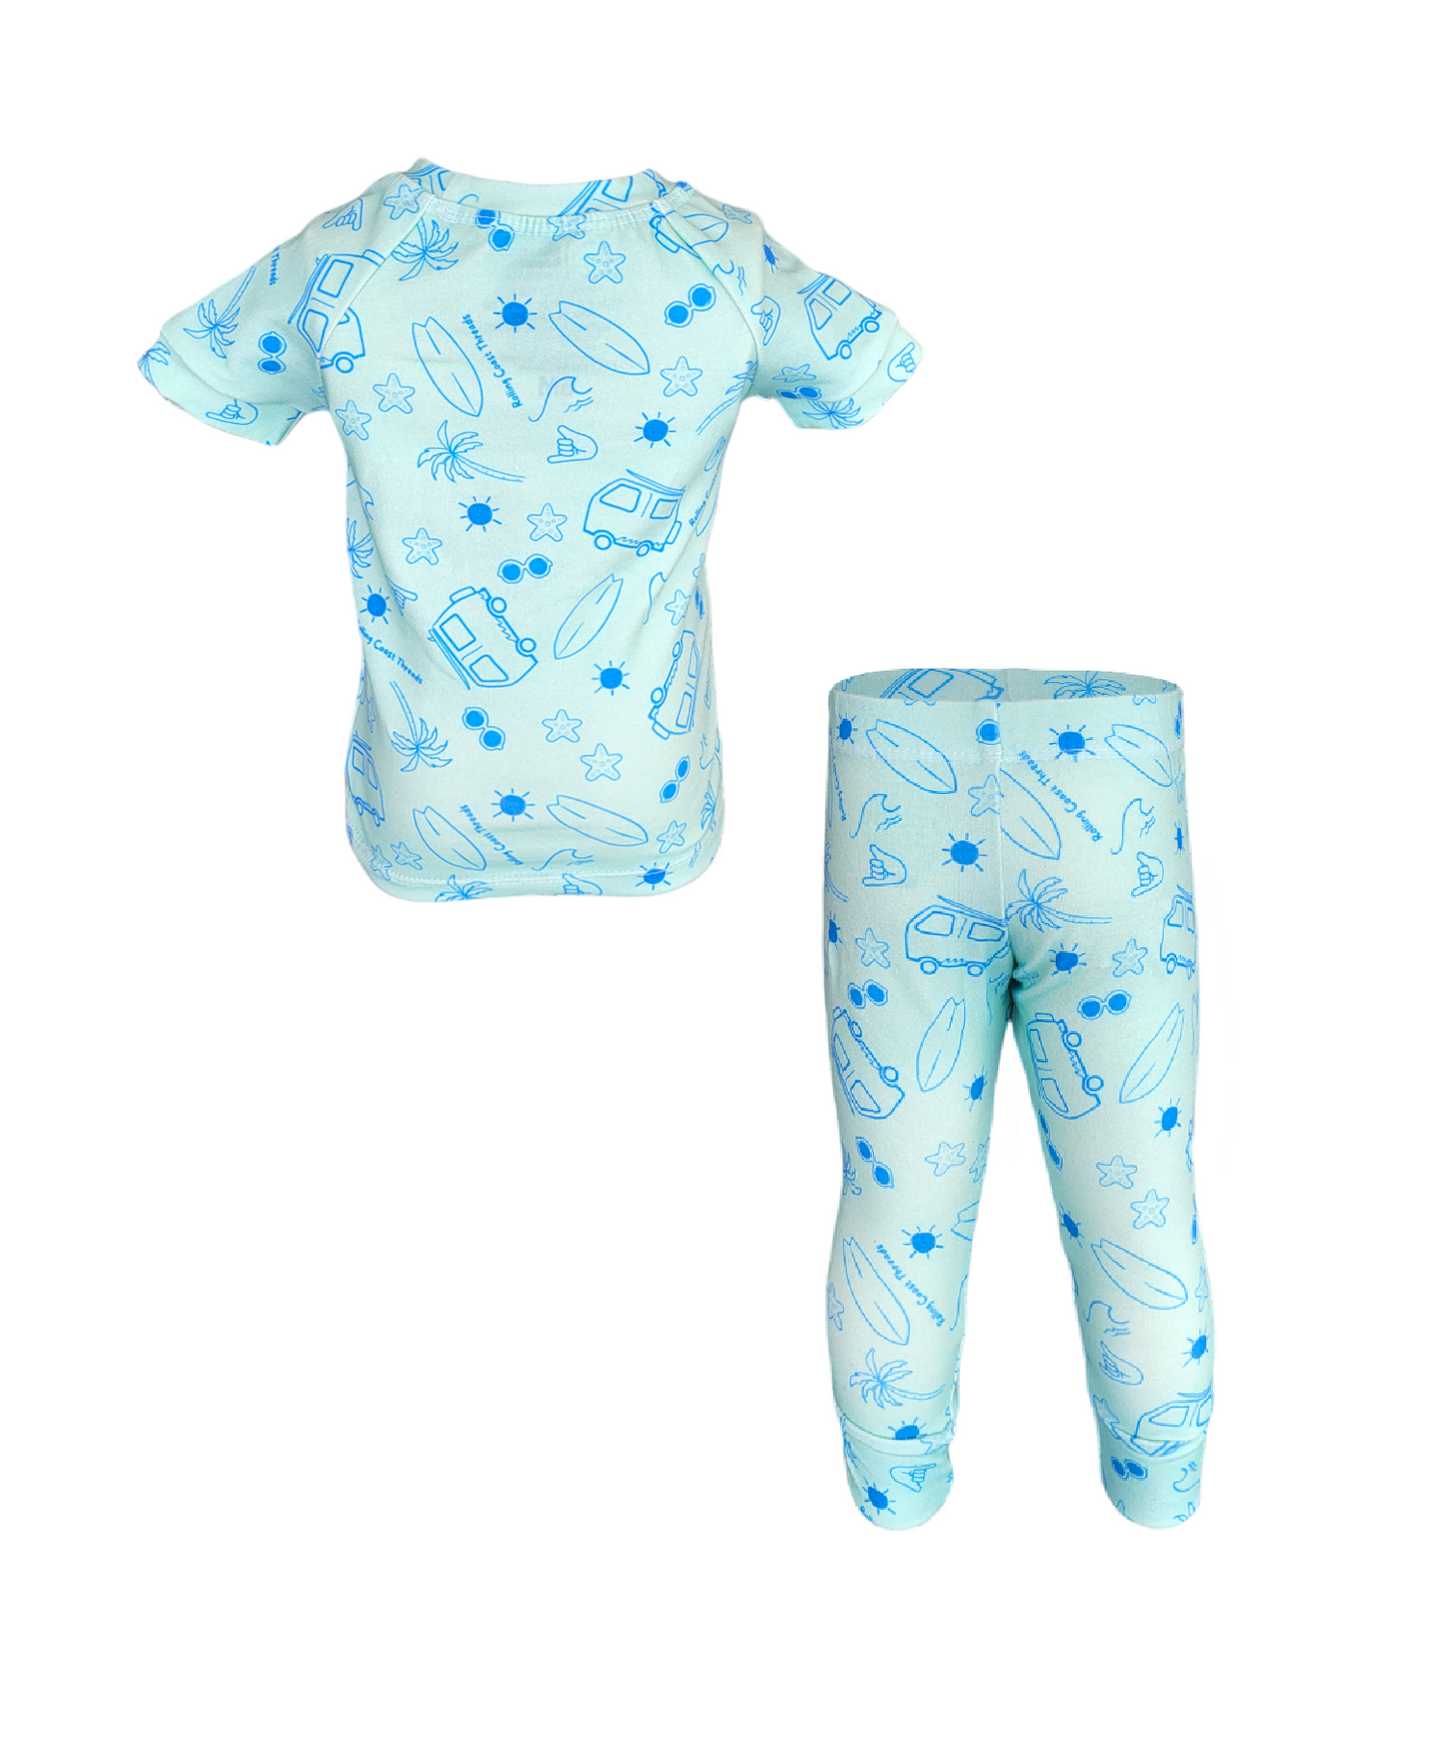 Back of Summer Lovin' Pajama Set. Organic teal short sleeve and pant set with blue beach elements.